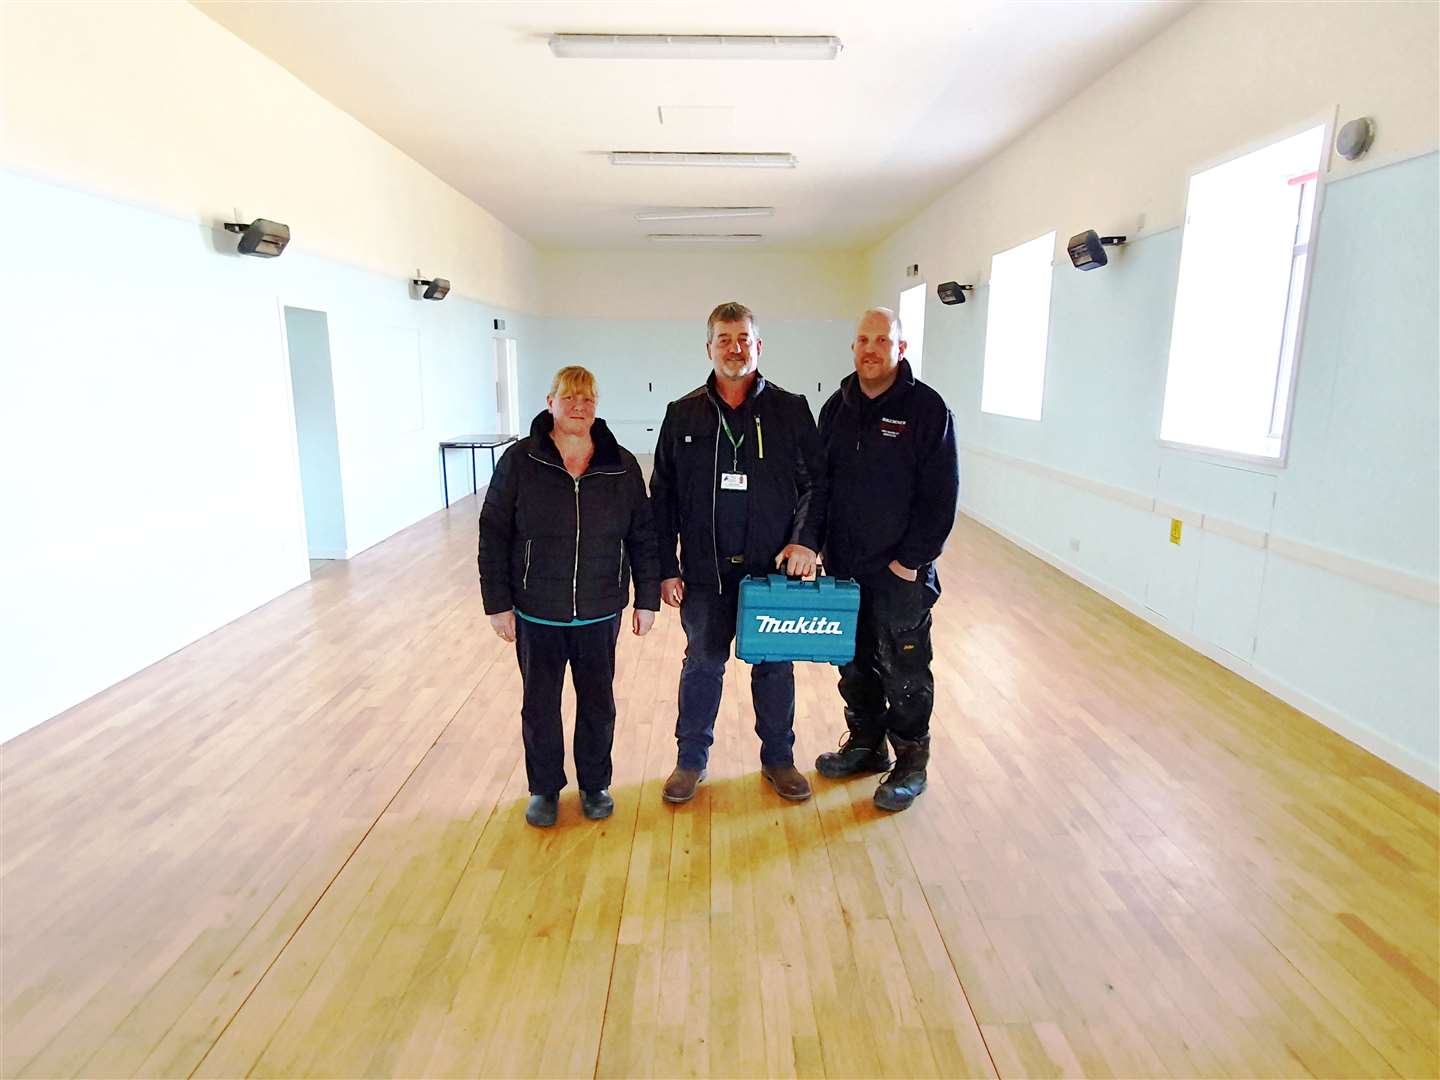 Pictured in the newly decorated Staxigoe Hall are (from left) Pam Jack, Bob Miller and Graeme Bremner.